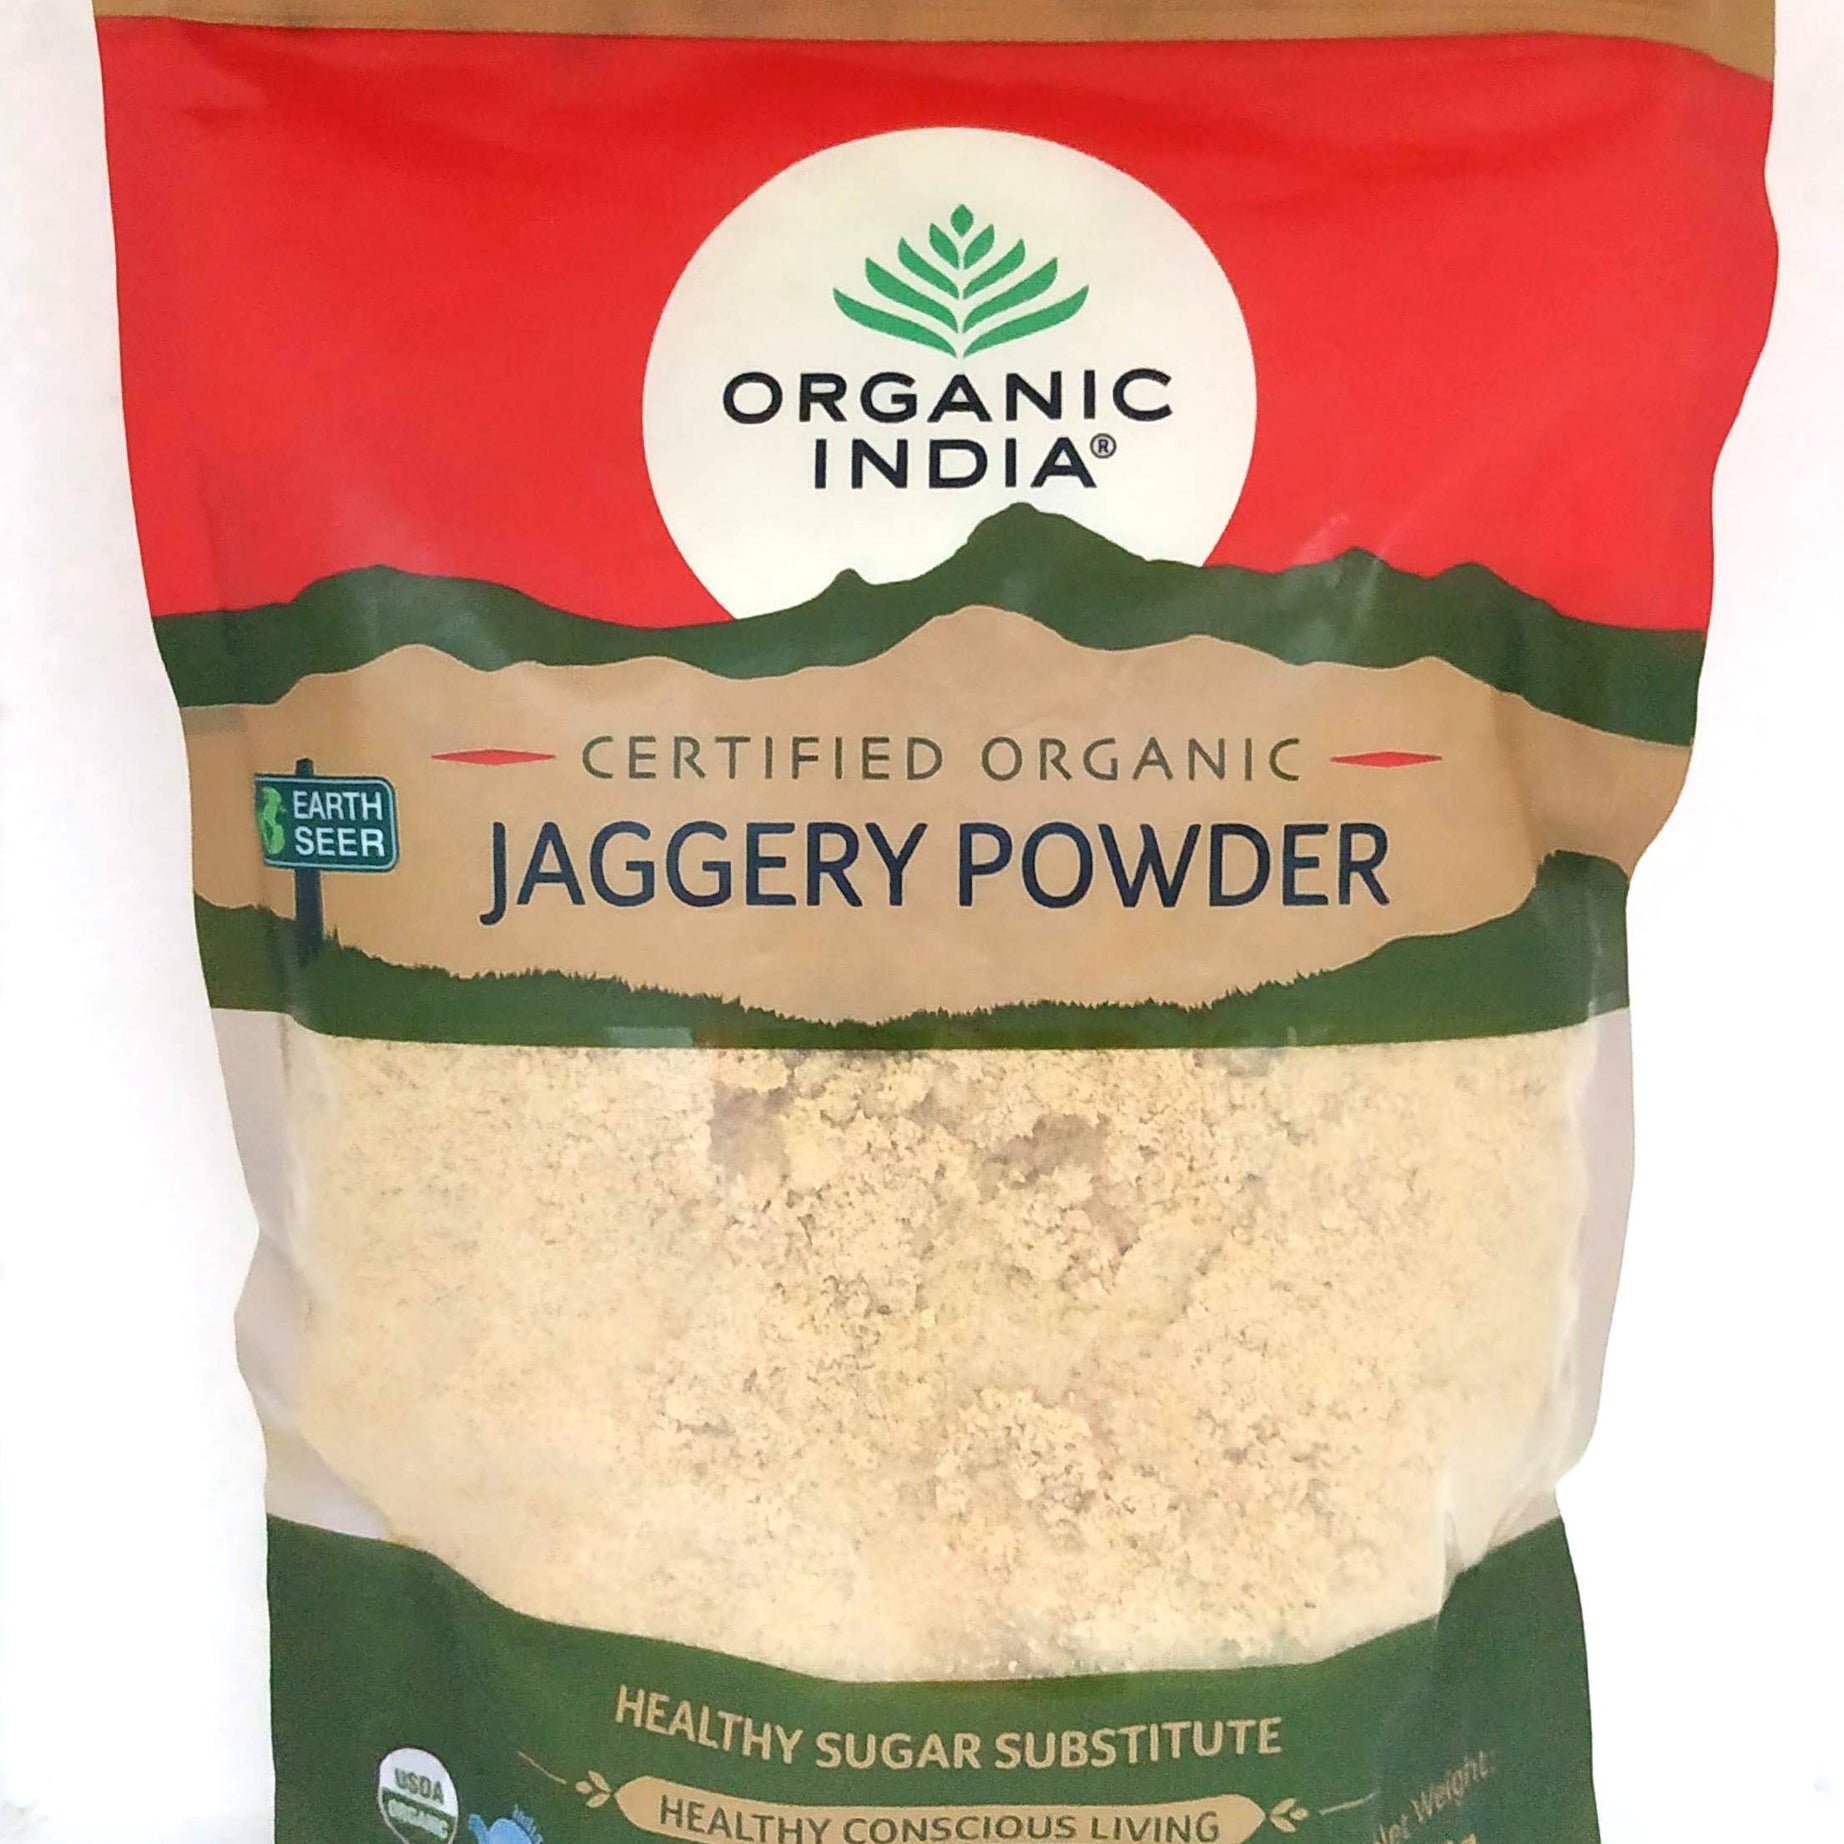 Shop Jaggery powder 500gm at price 85.00 from Organic India Online - Ayush Care